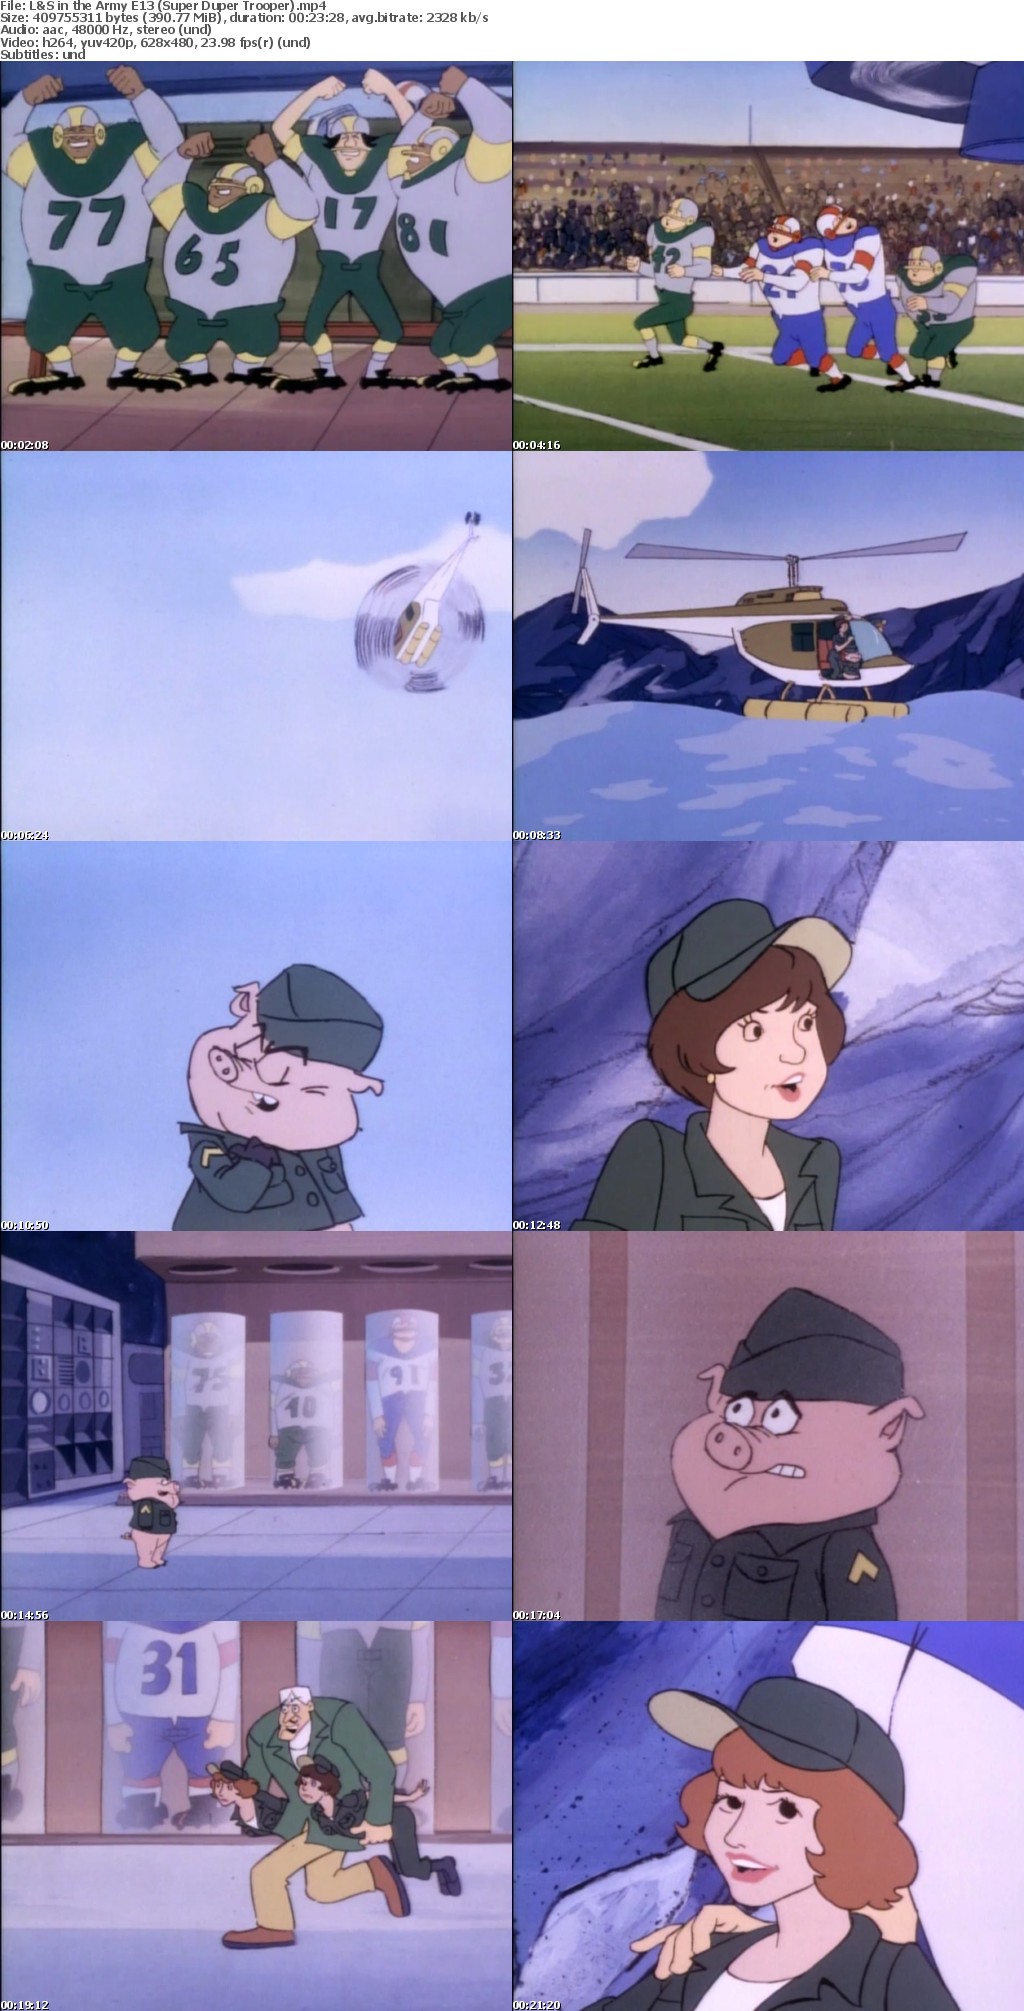 Laverne and Shirley in the Army (Cartoon series in MP4 format)